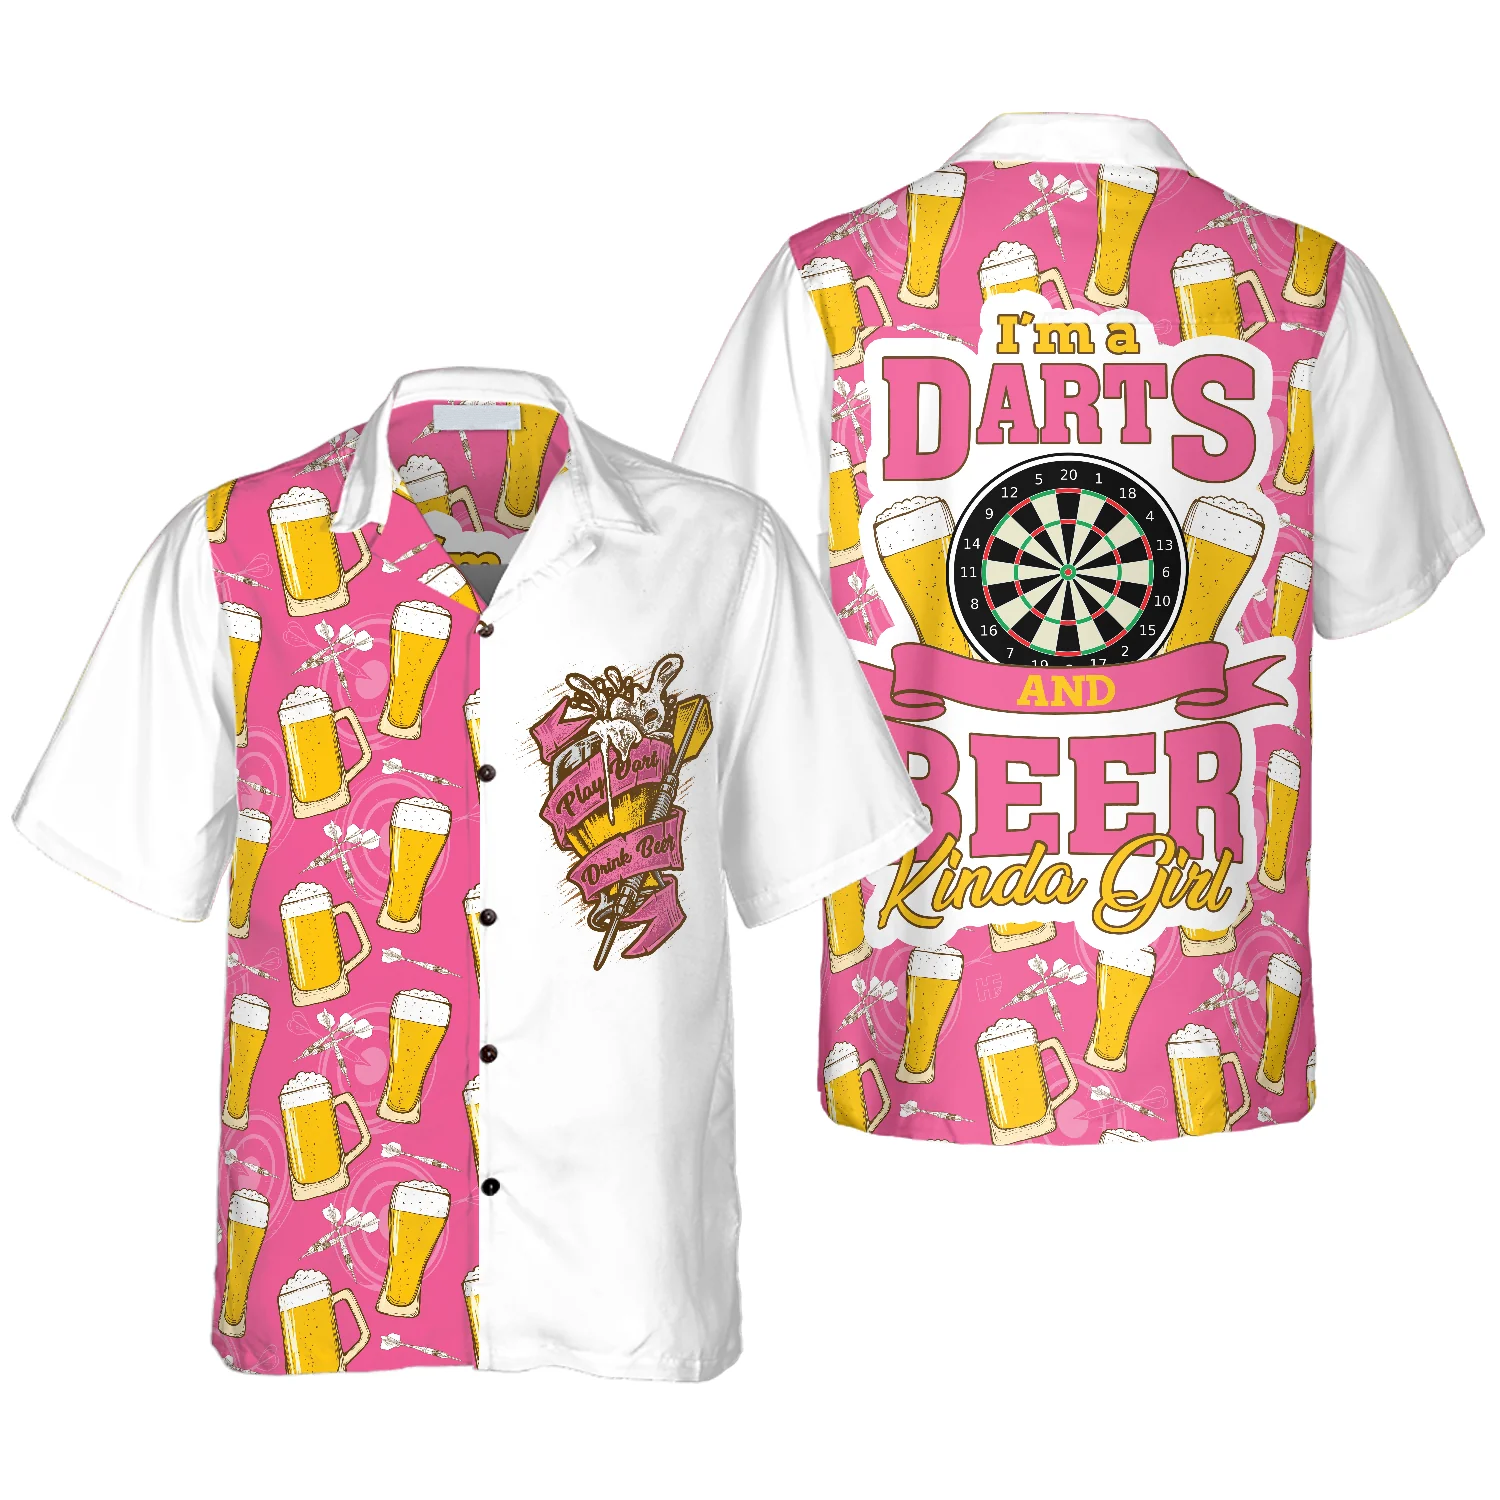 Darts And Beer That